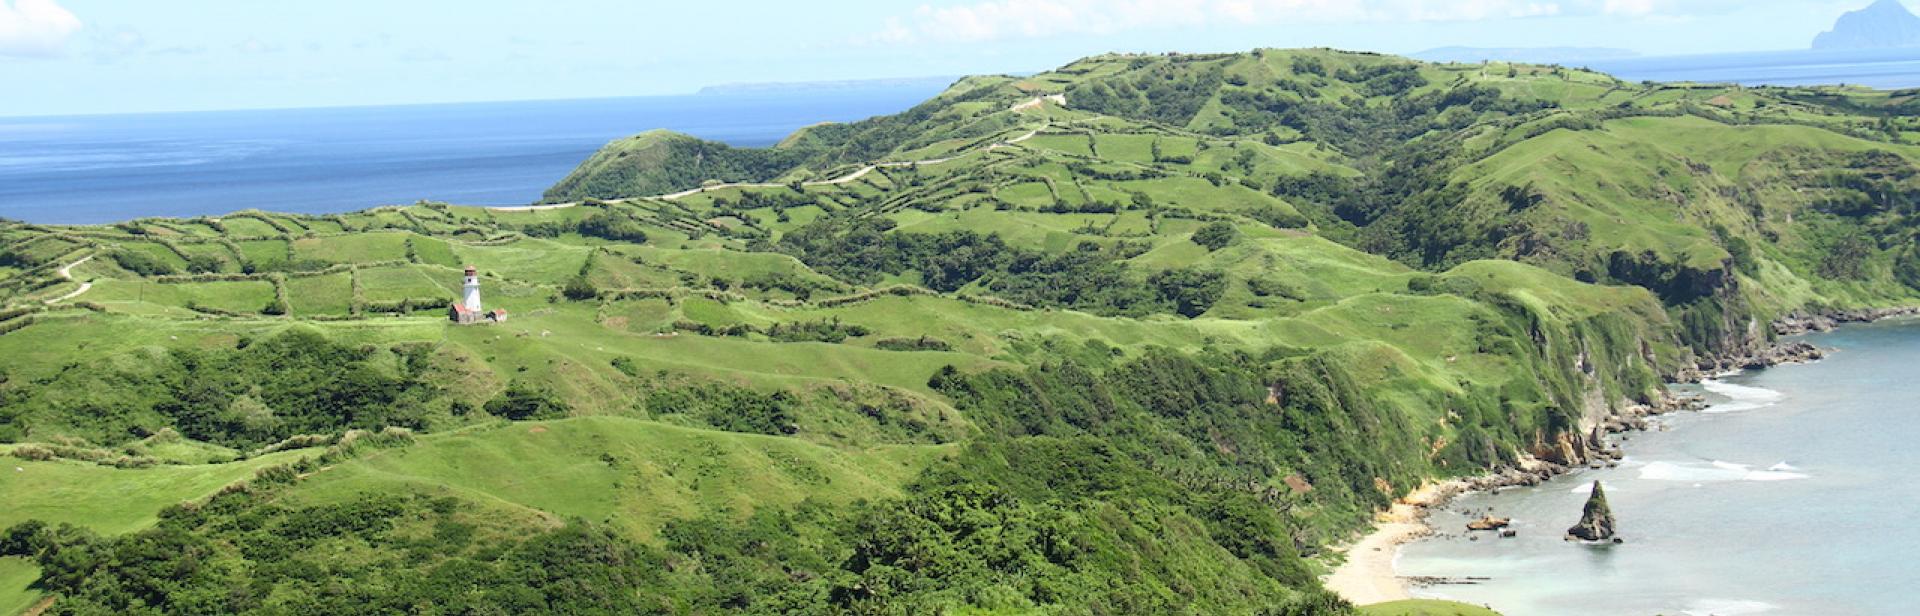 Batanes Islands in the Philippines